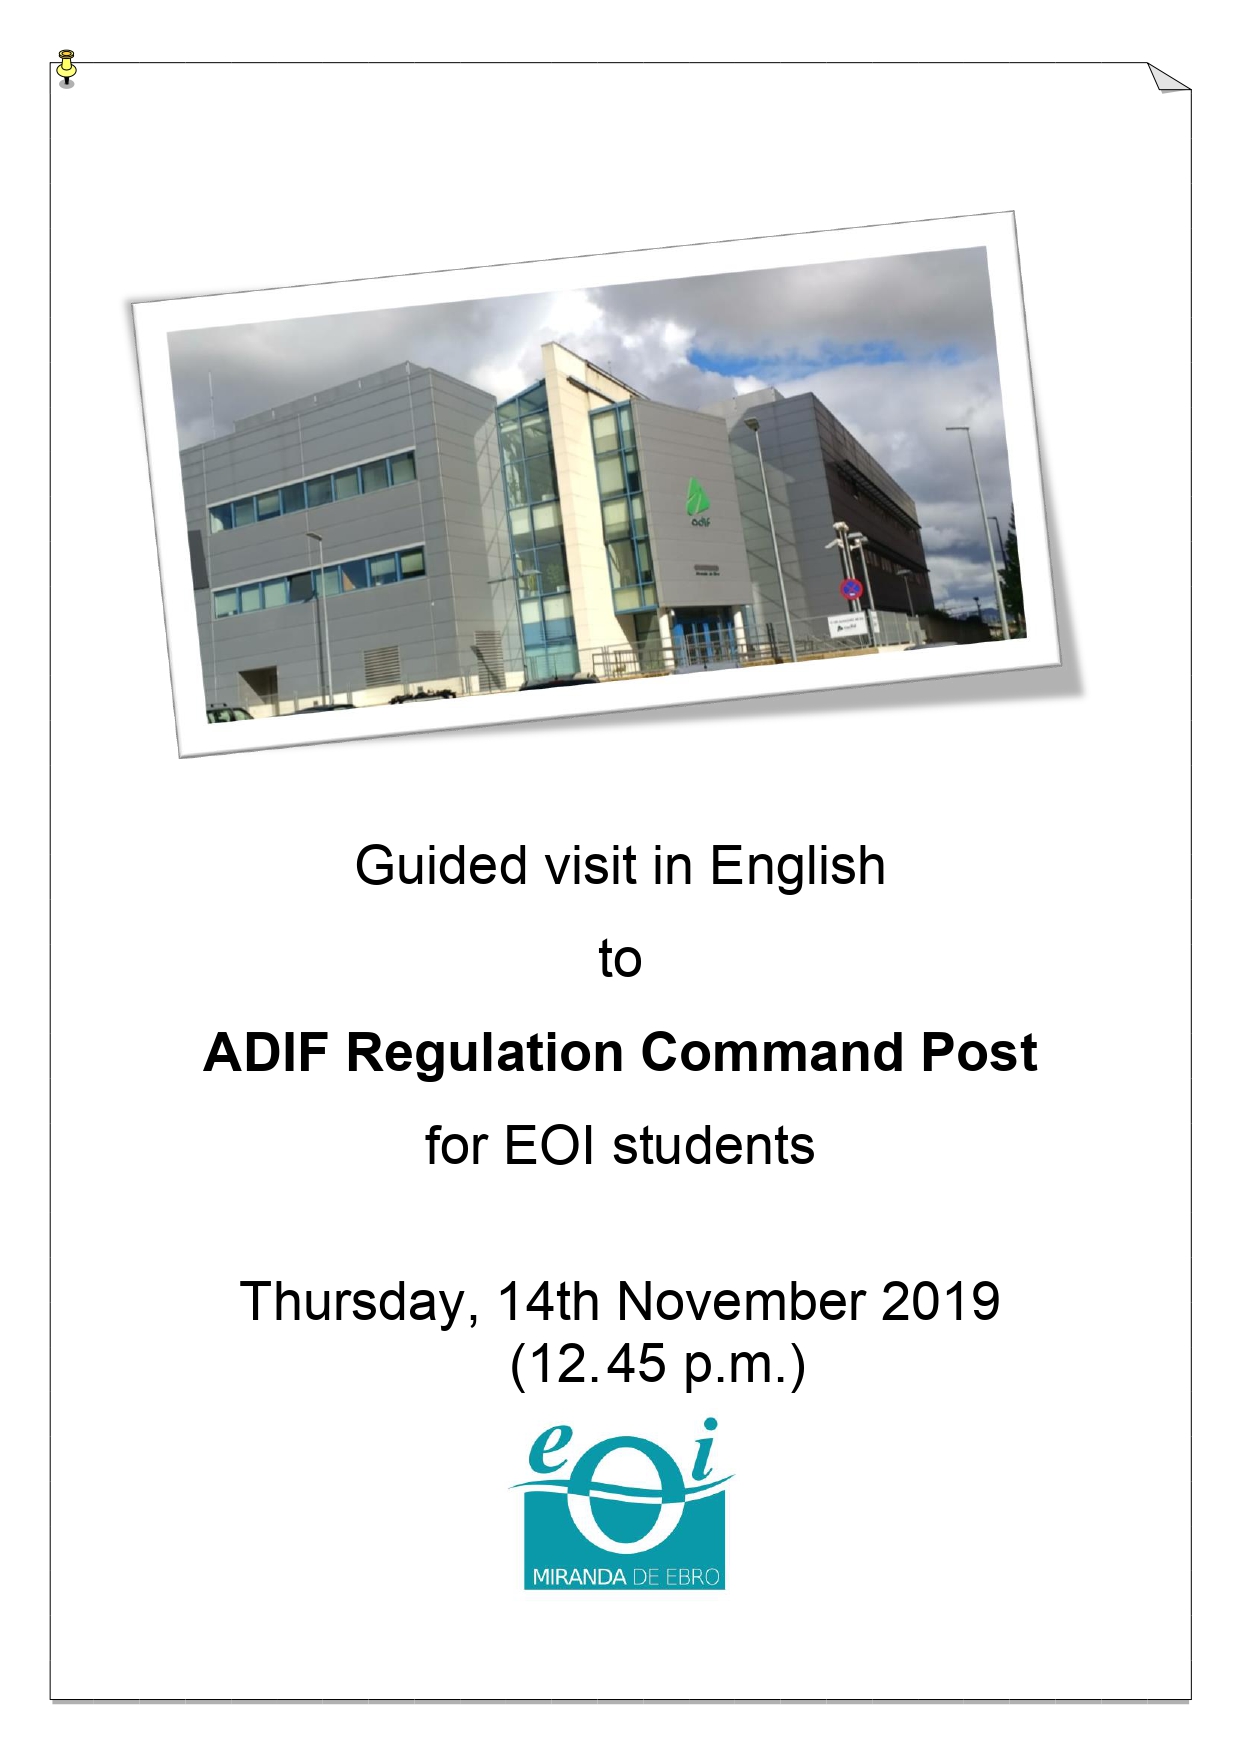 Guided visit to ADIF